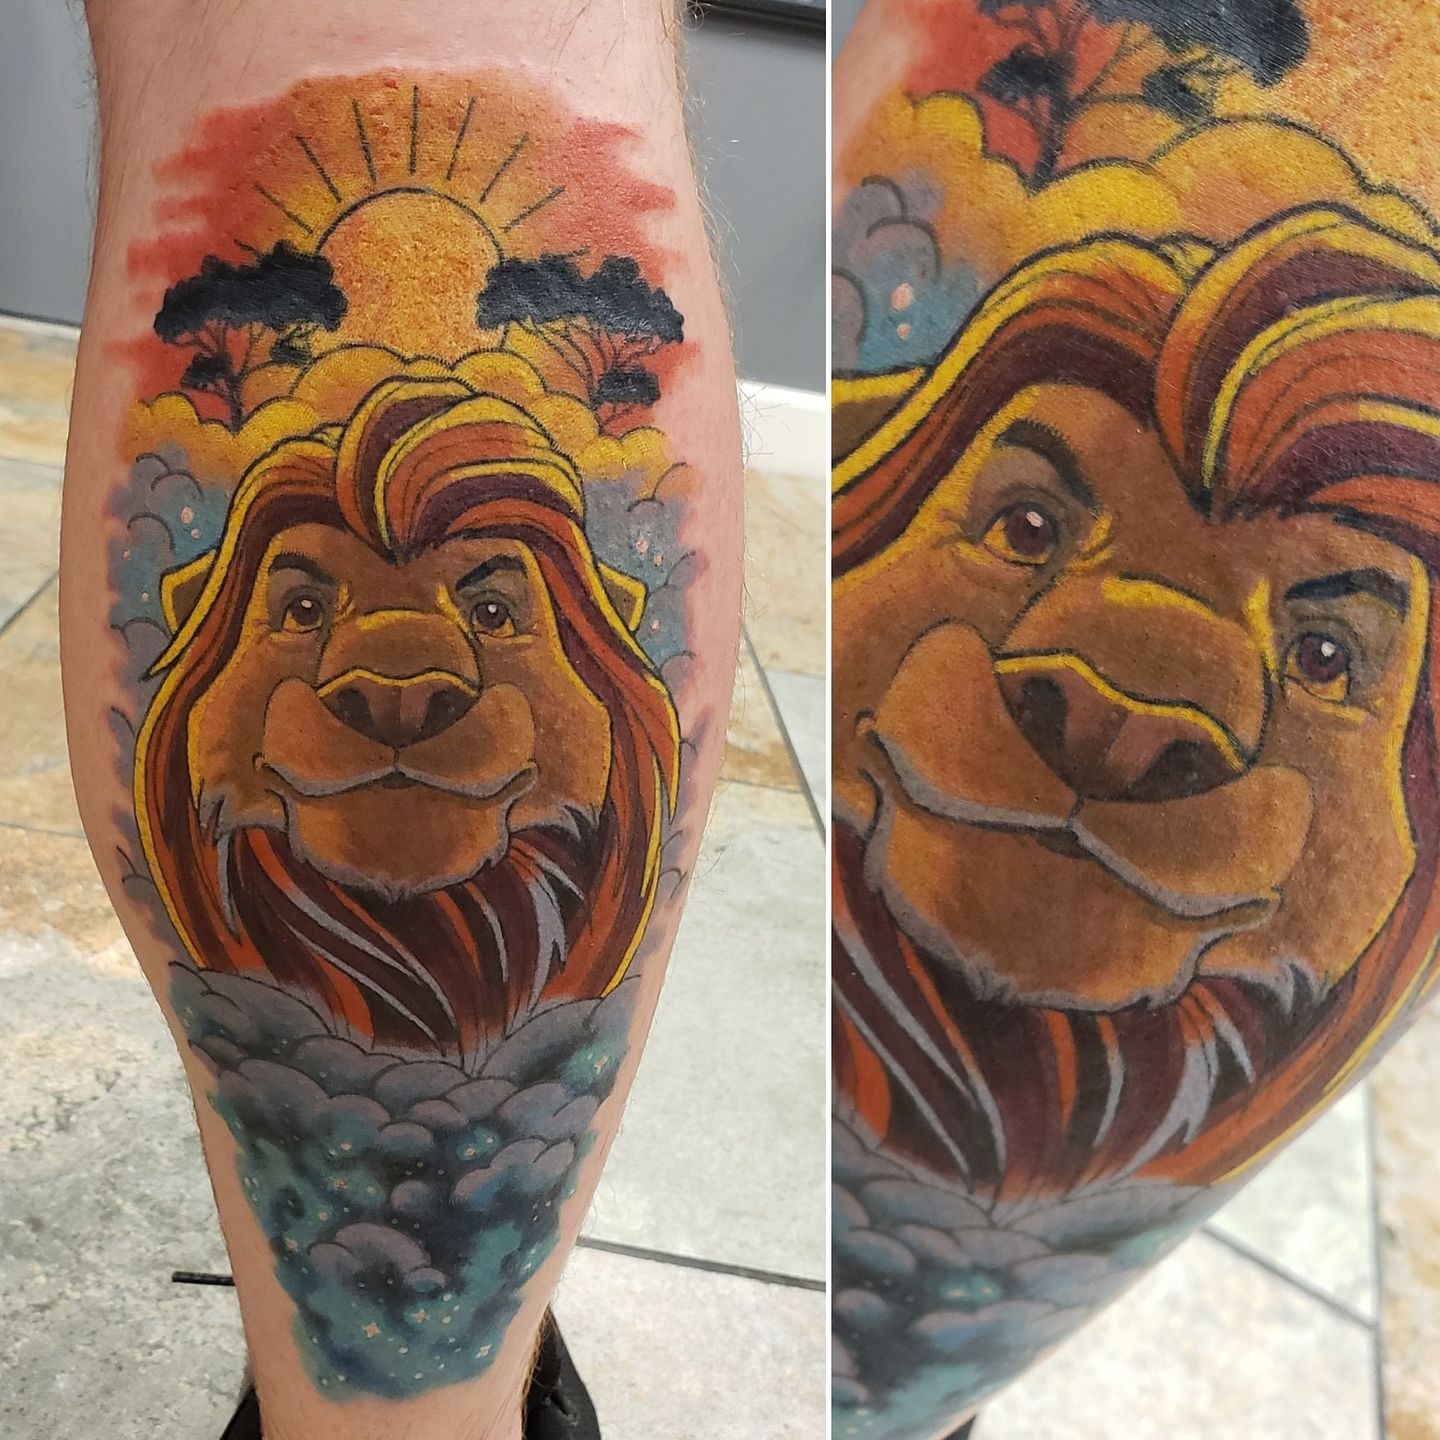 GeeksterInk  Super awesome Mufasa and Simba tattoo done  Facebook